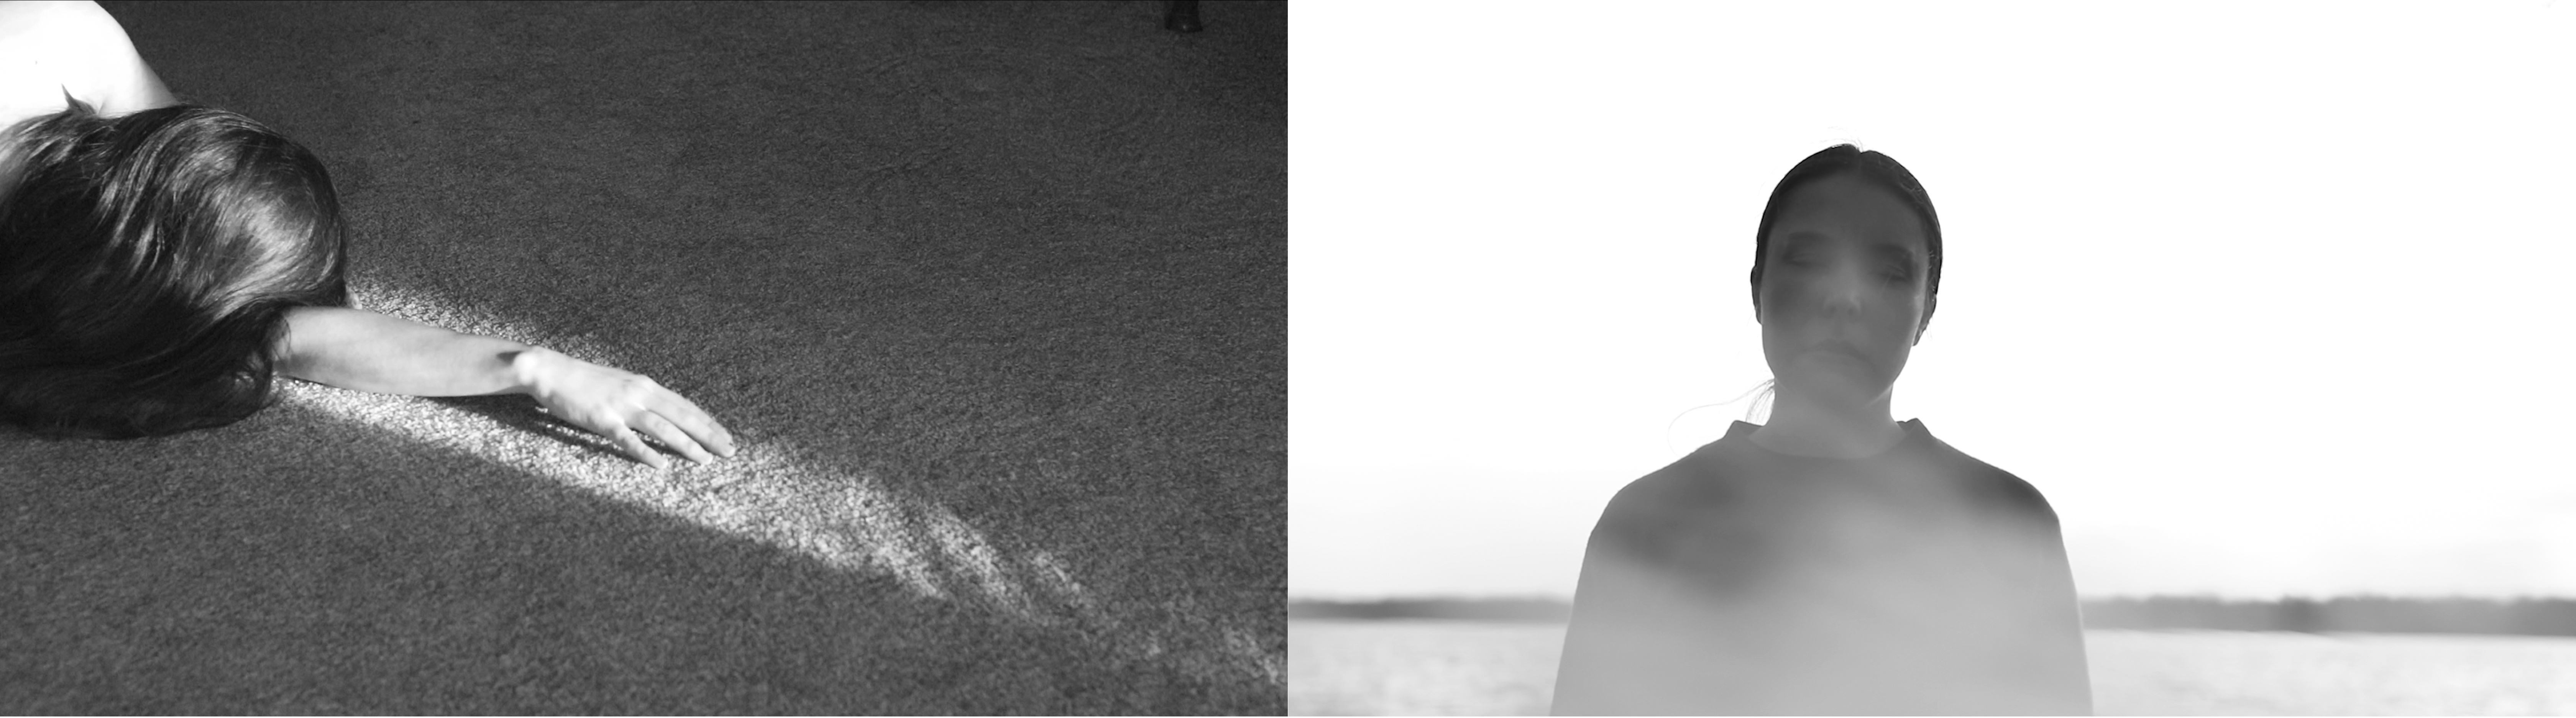 Two black and white photos side by side by MFA student Amrita Stützle.